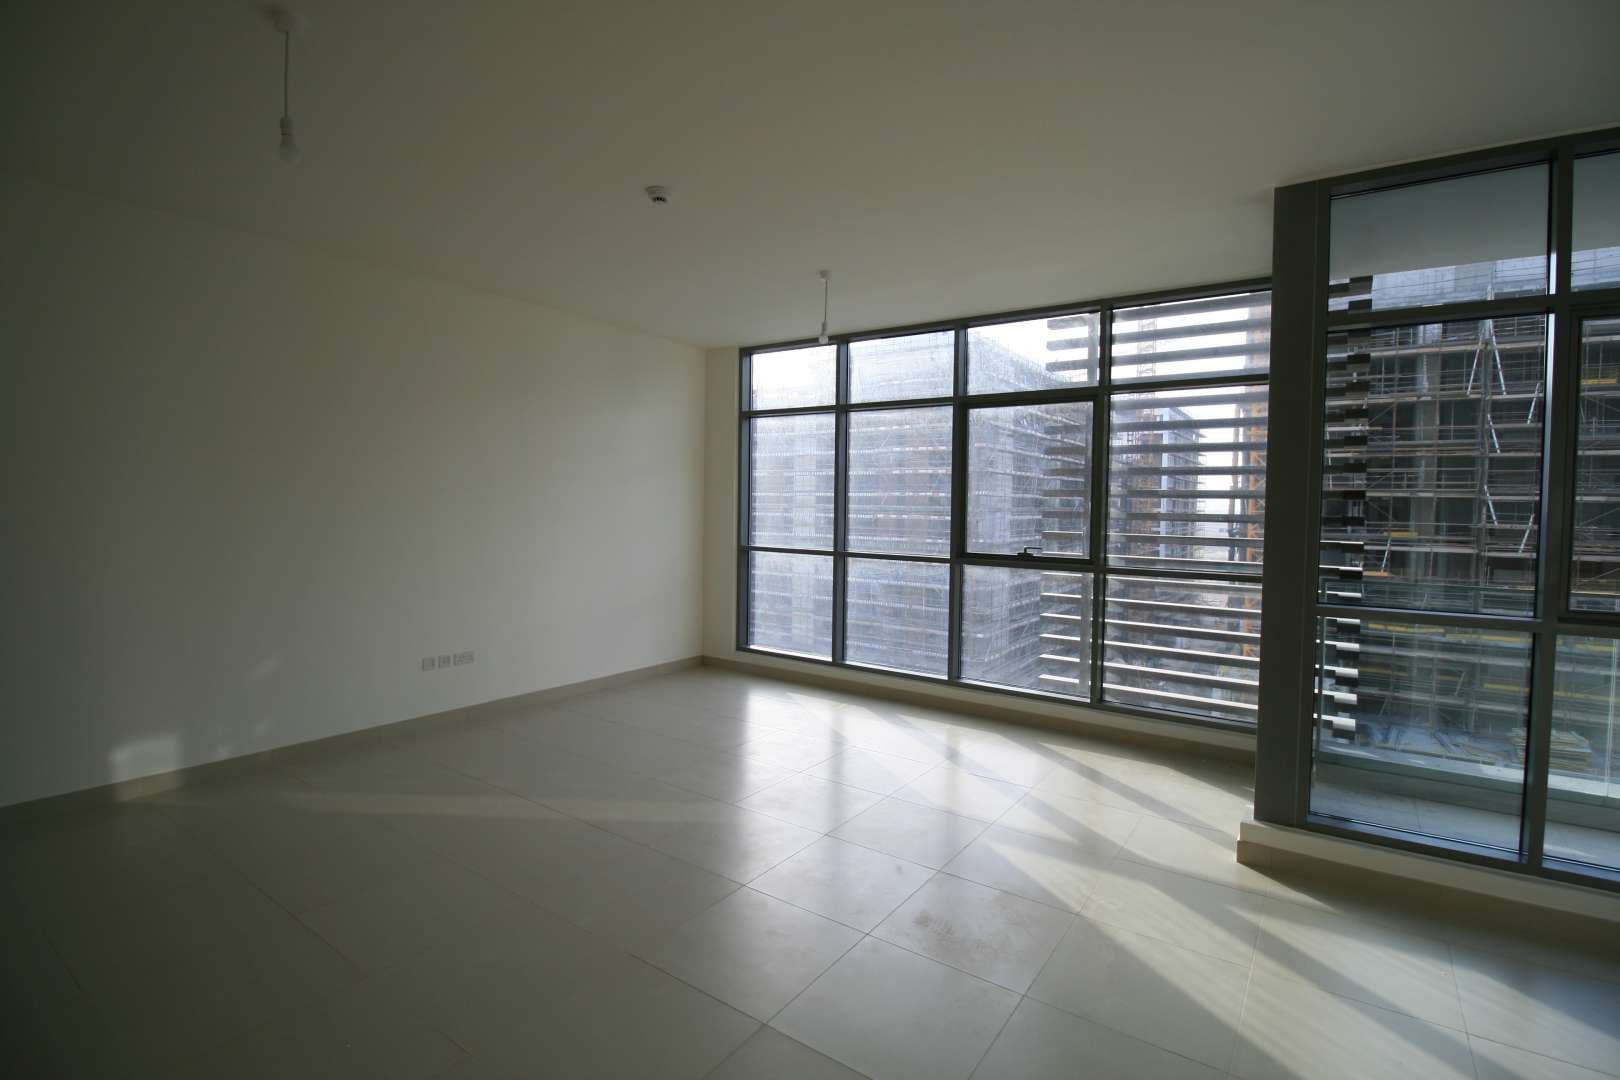 2 Bedroom Apartment For Rent Acacia Park Heights Lp05060 1c883804893f2900.jpg